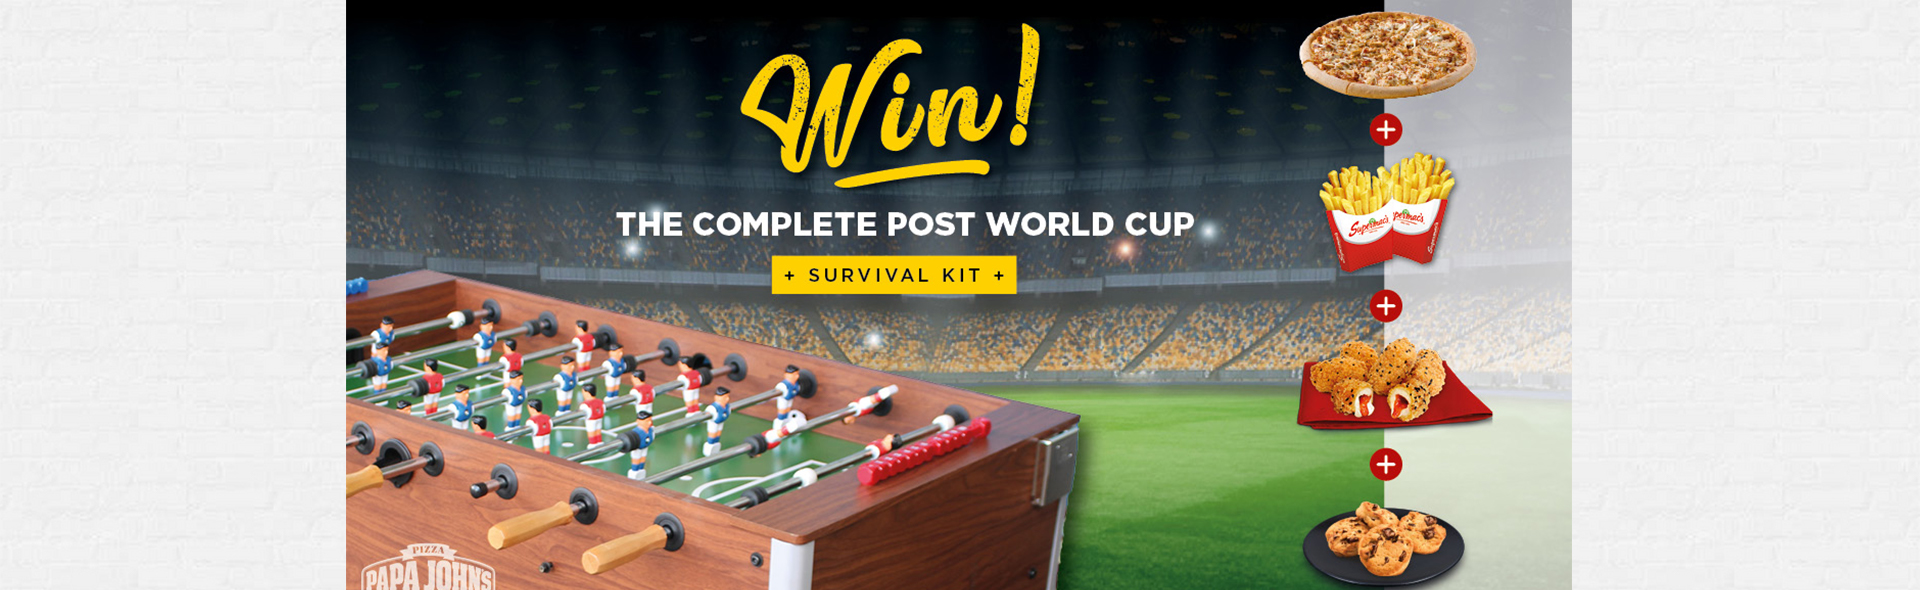 Papa Johns Complete Post World Cup Survival Kit